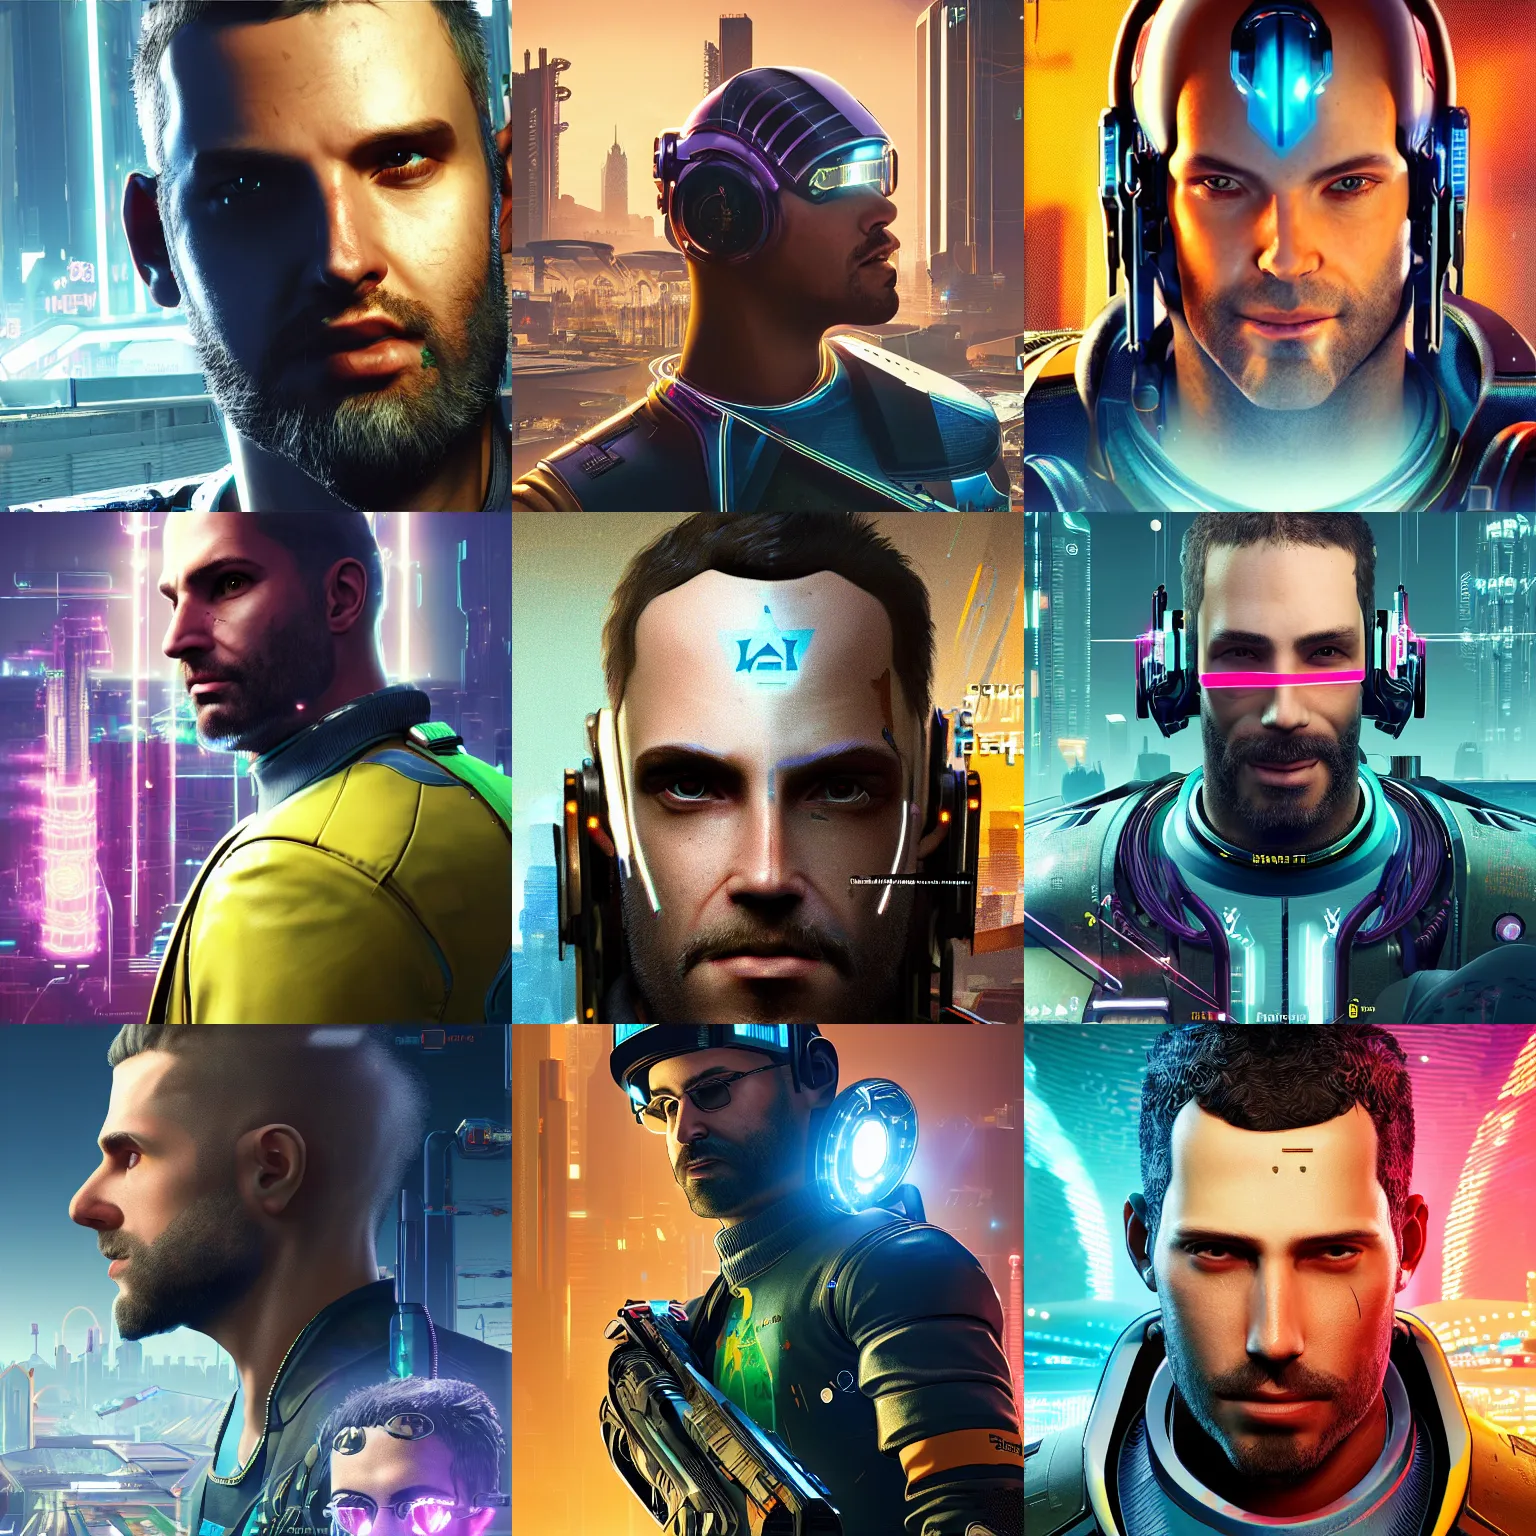 Prompt: isaac albert arthur, science and futurism portrait in cyberpunk 2 0 7 7 3 8 4 0 x 2 1 6 0 cosmos